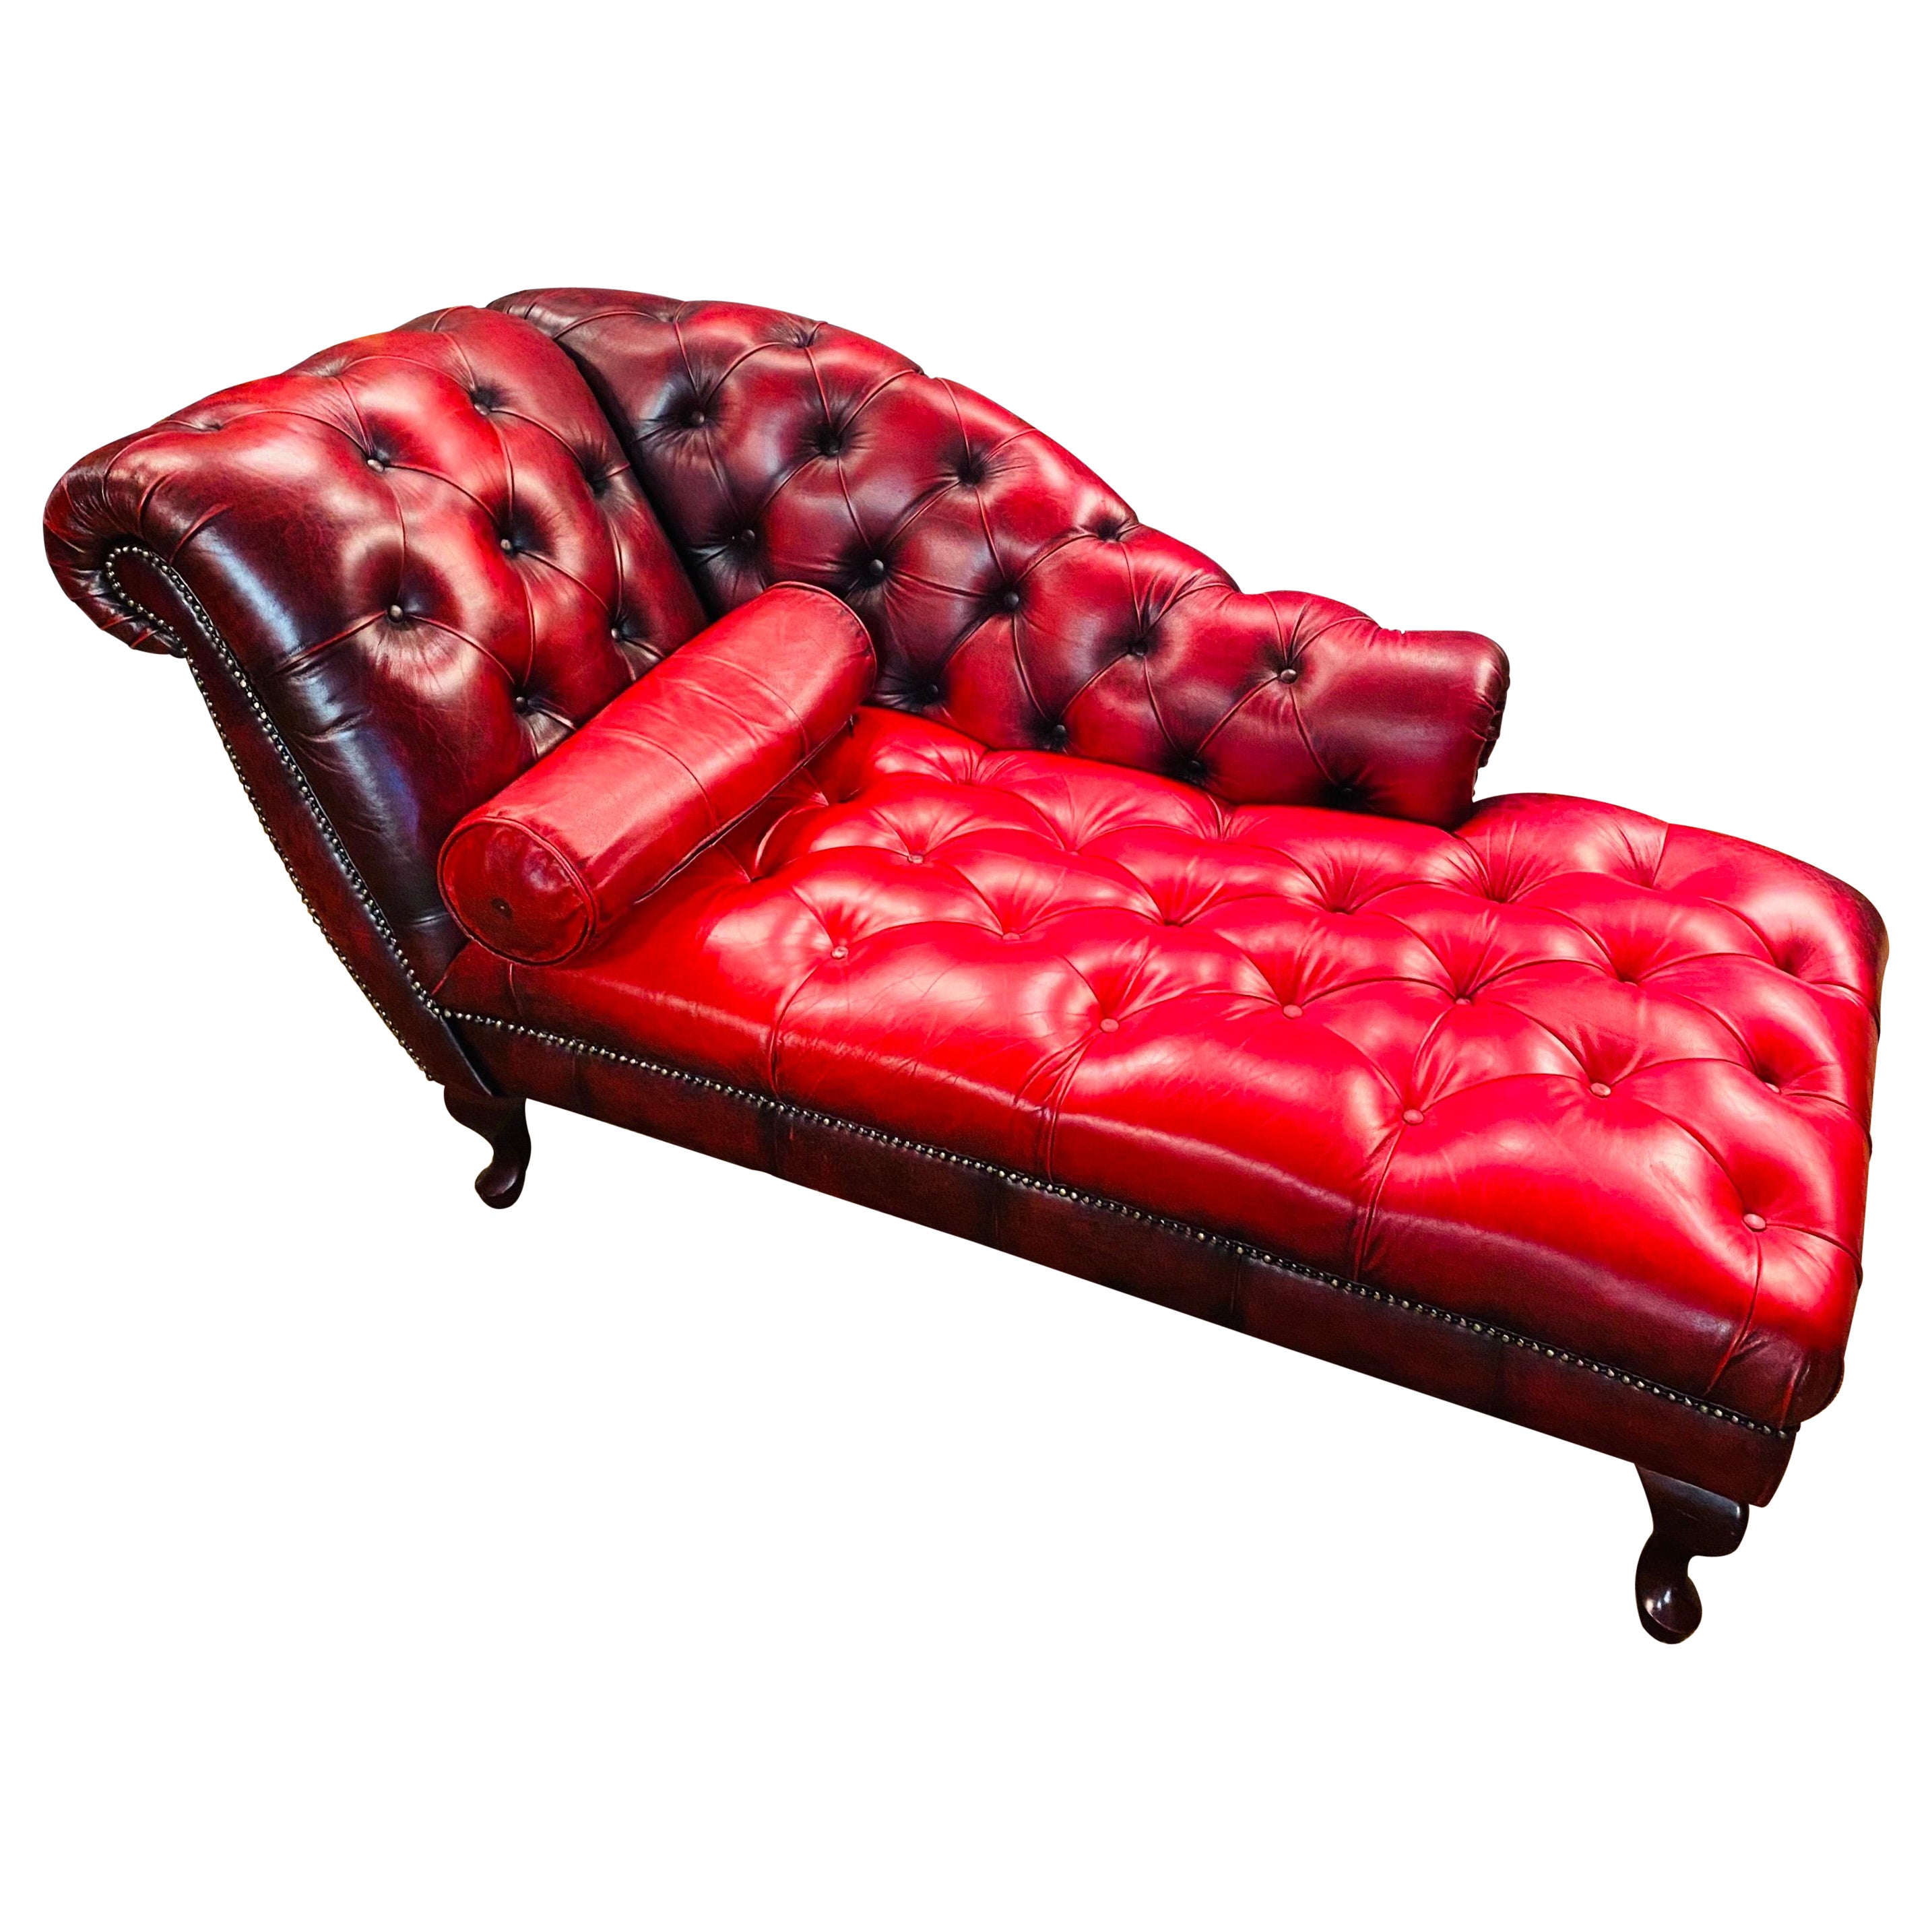 Lovely original vintage Chesterfield Red Leather Chaise Lounge Daybed Sofa For Sale